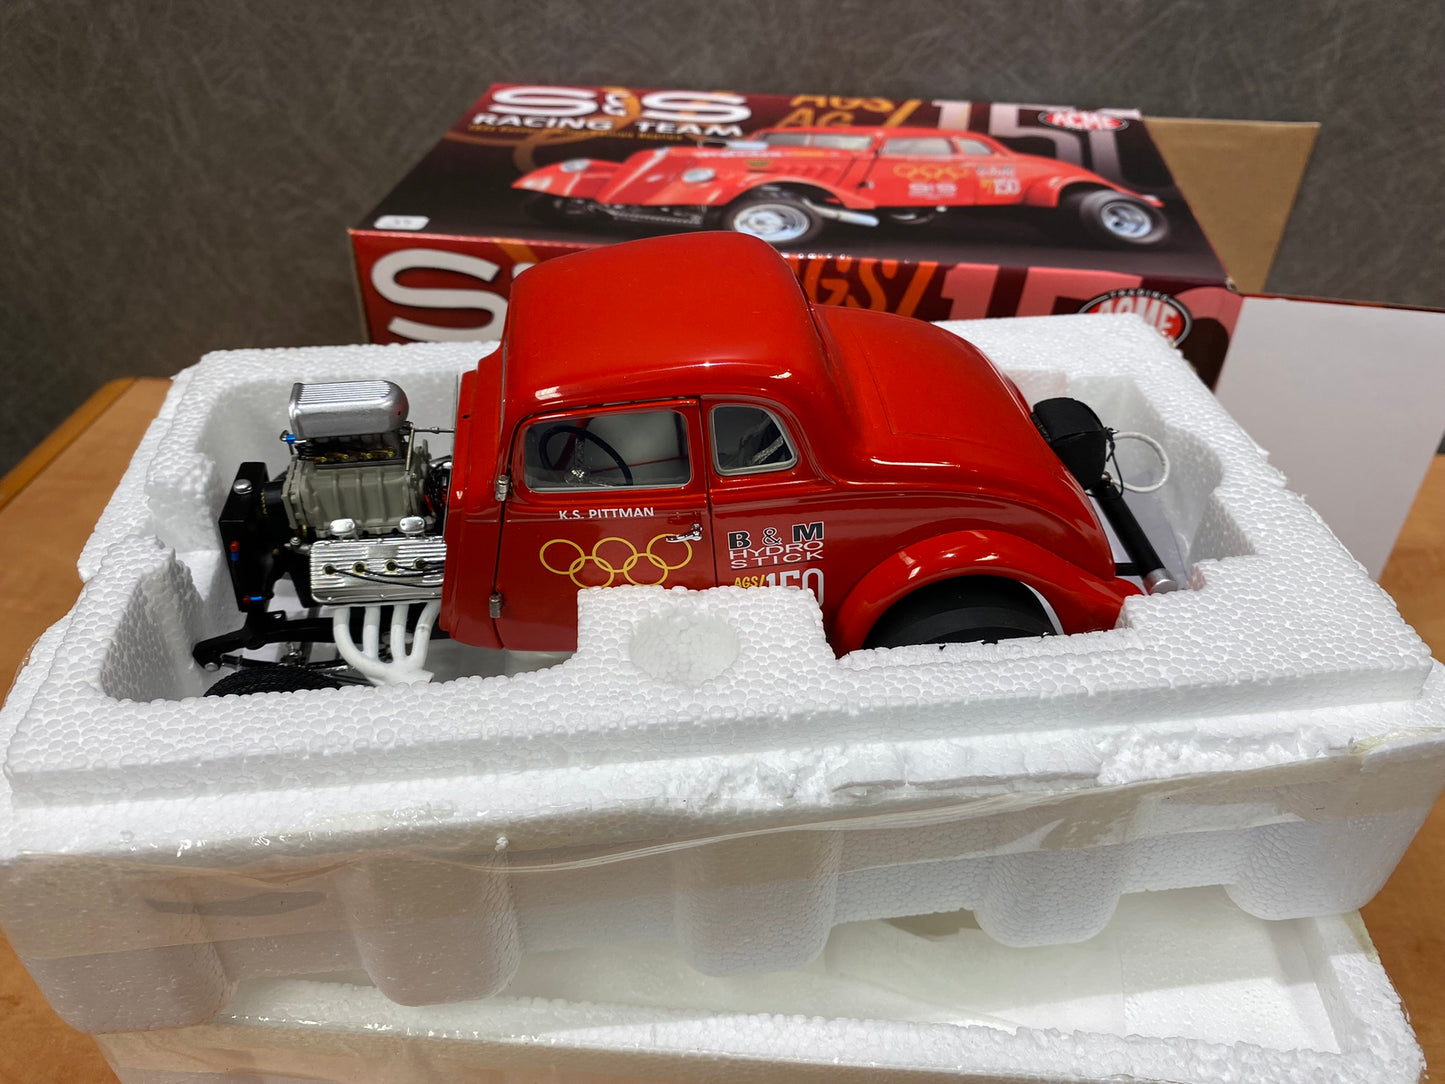 1/18 Scale 1933 Willy's Gasser S&S Racing - K.S. Pitman